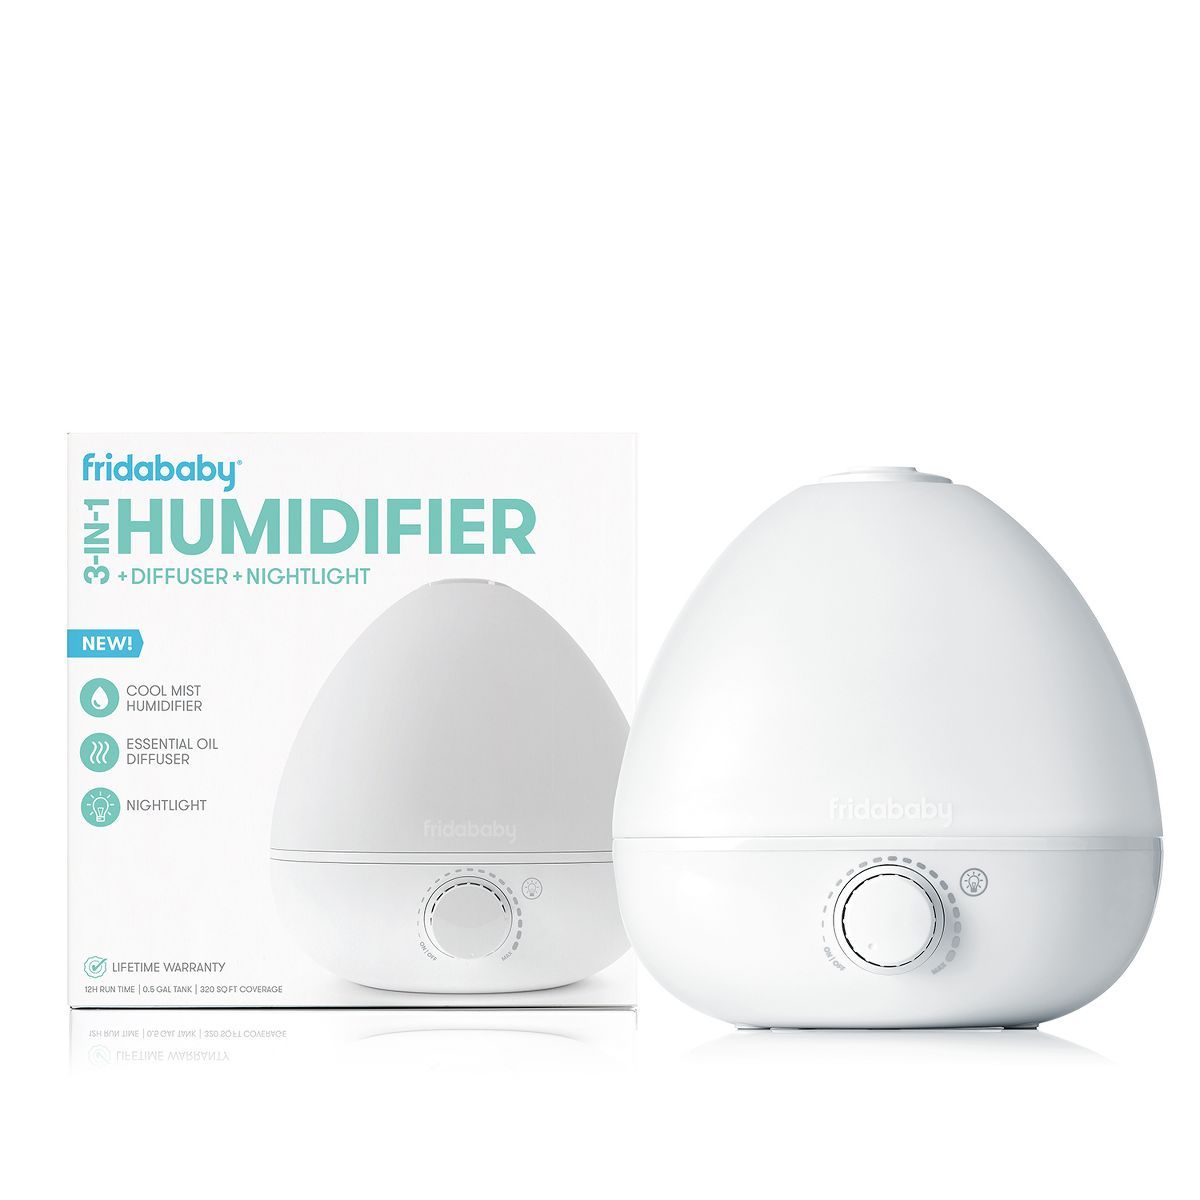 Frida Baby 3-in-1 Humidifier with Diffuser and Nightlight | Target